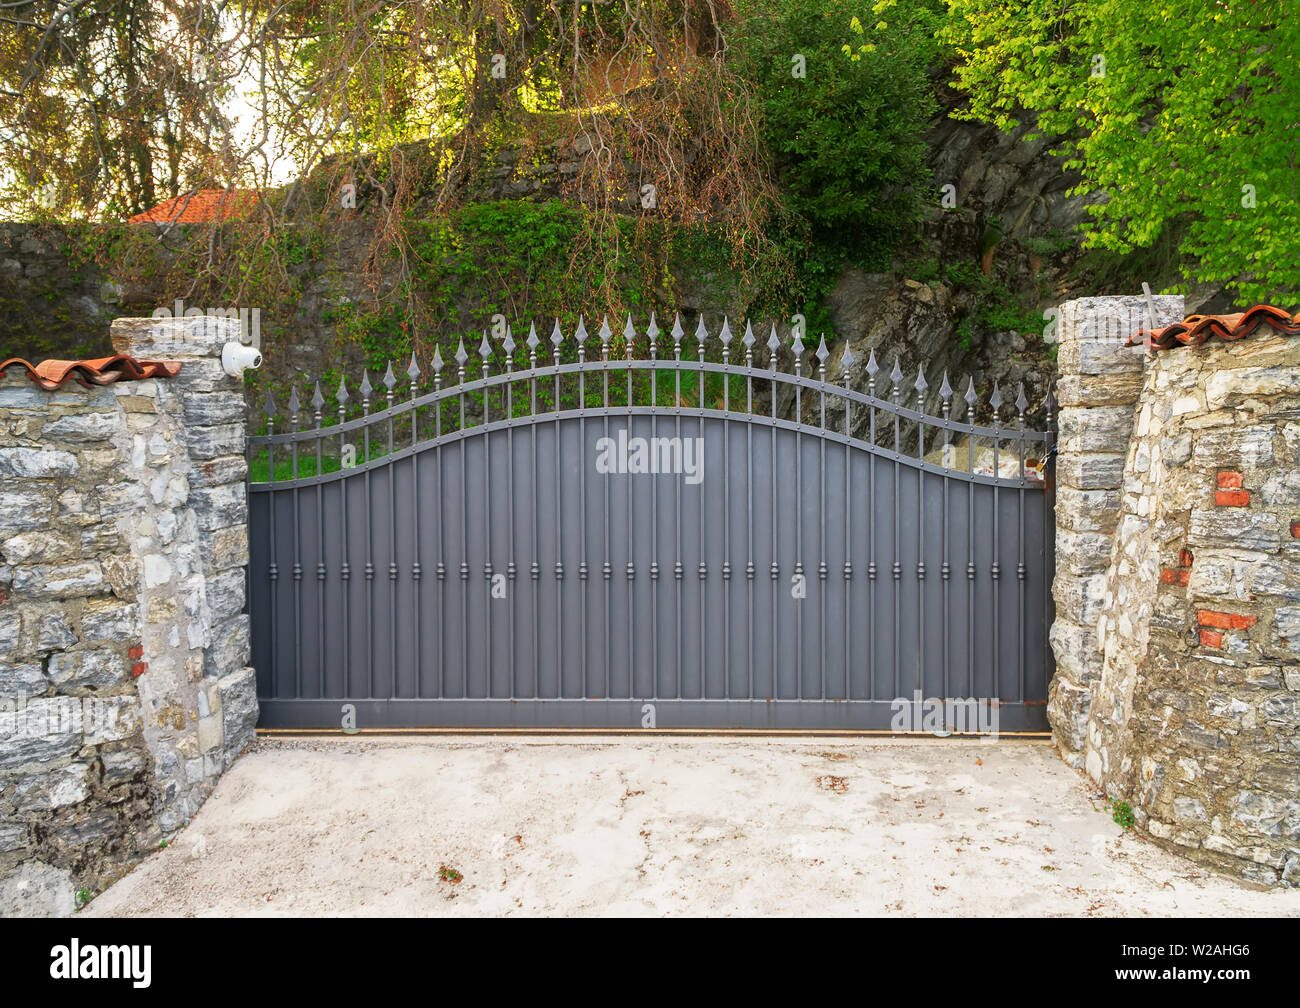 Metal gates and security camera. Concept of private property. Stock Photo